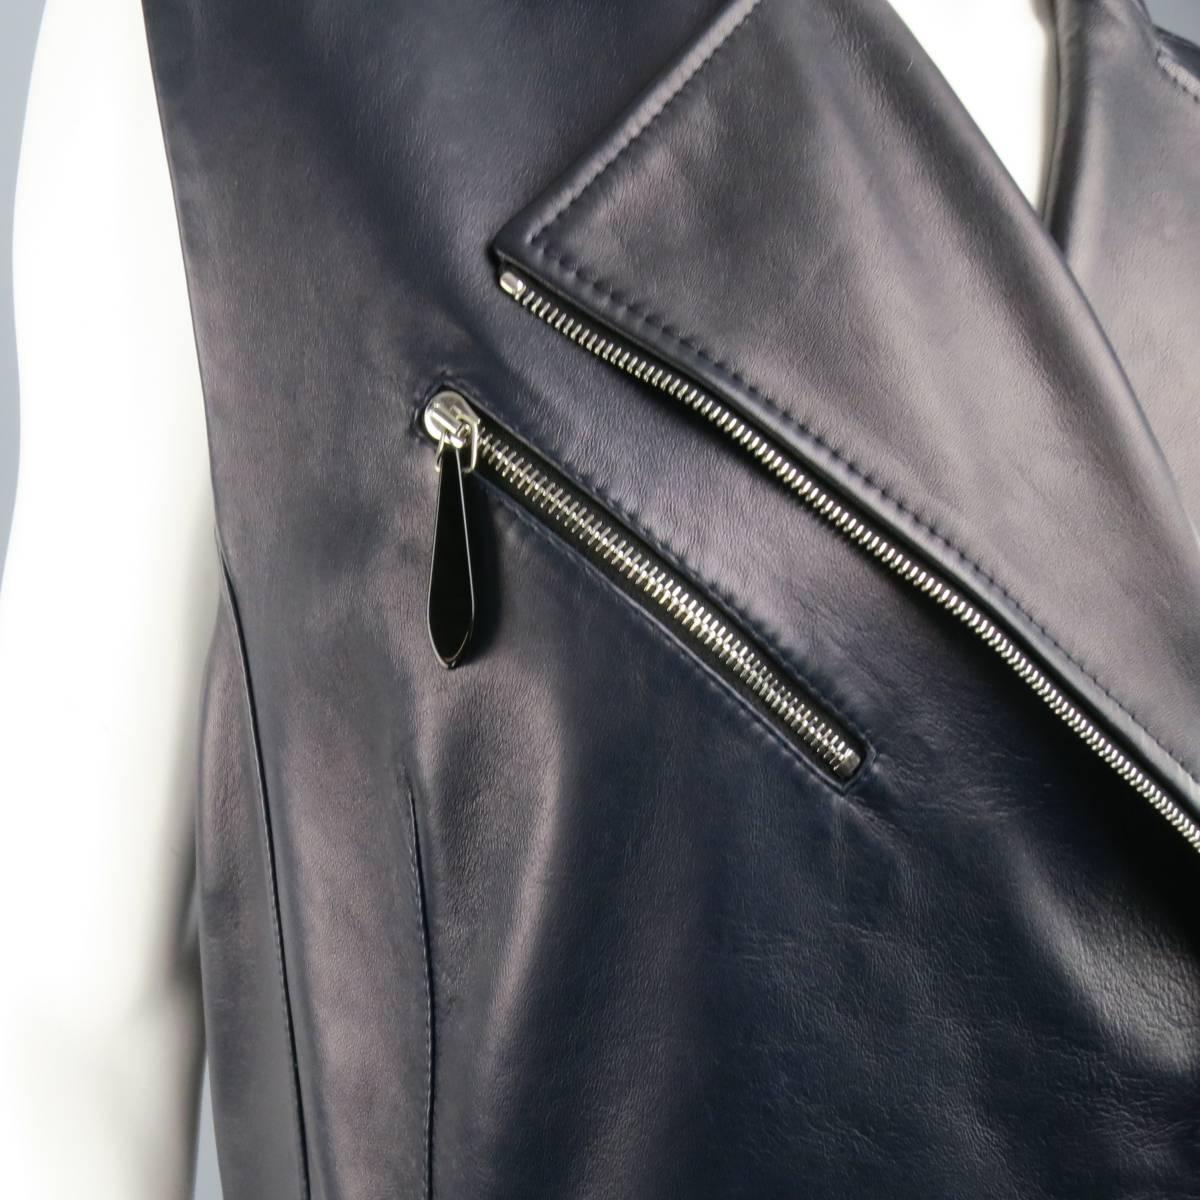 LENA LUMELSKY motorcycle style biker vest in a soft smooth navy blue leather and features a double breasted zip closure, pointed lapels, zip pockets with black bead  charm pulls, and a structured back. Minor wear on leather. Made in Belgium.
 
Good